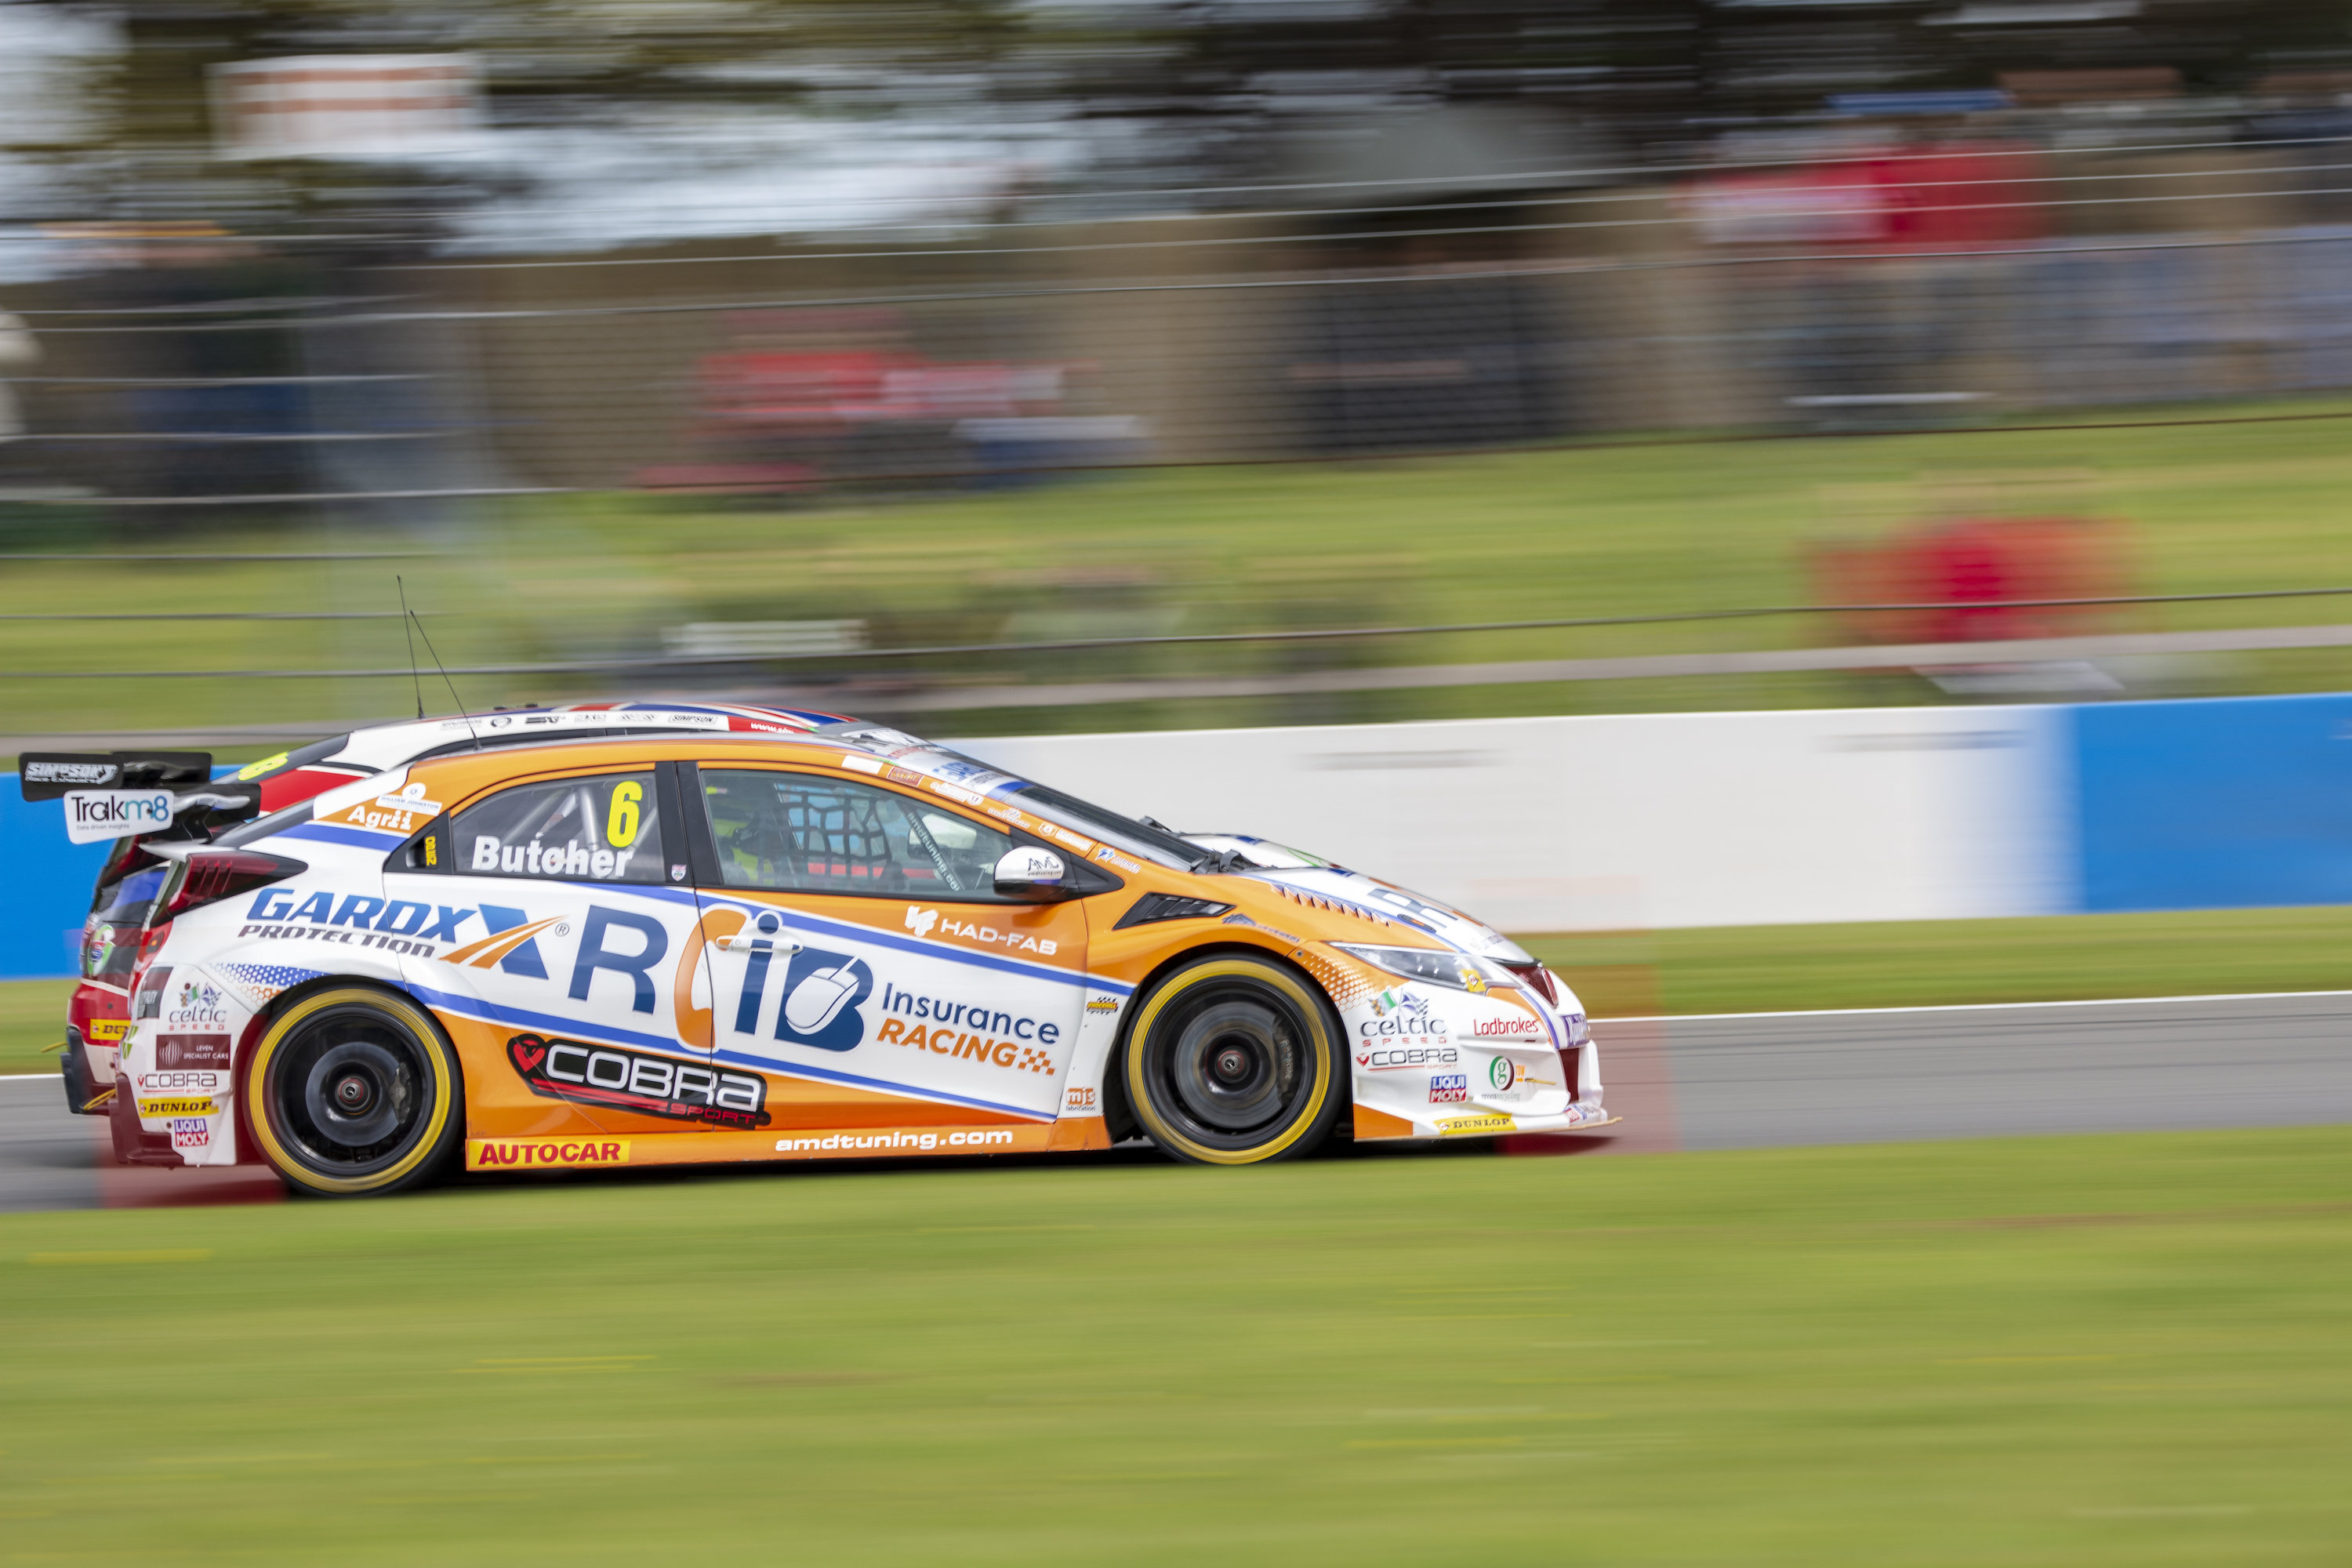 Cobra Sport AmD with AutoAid/RCIB Insurance Racing maintains strong start at Donington Park